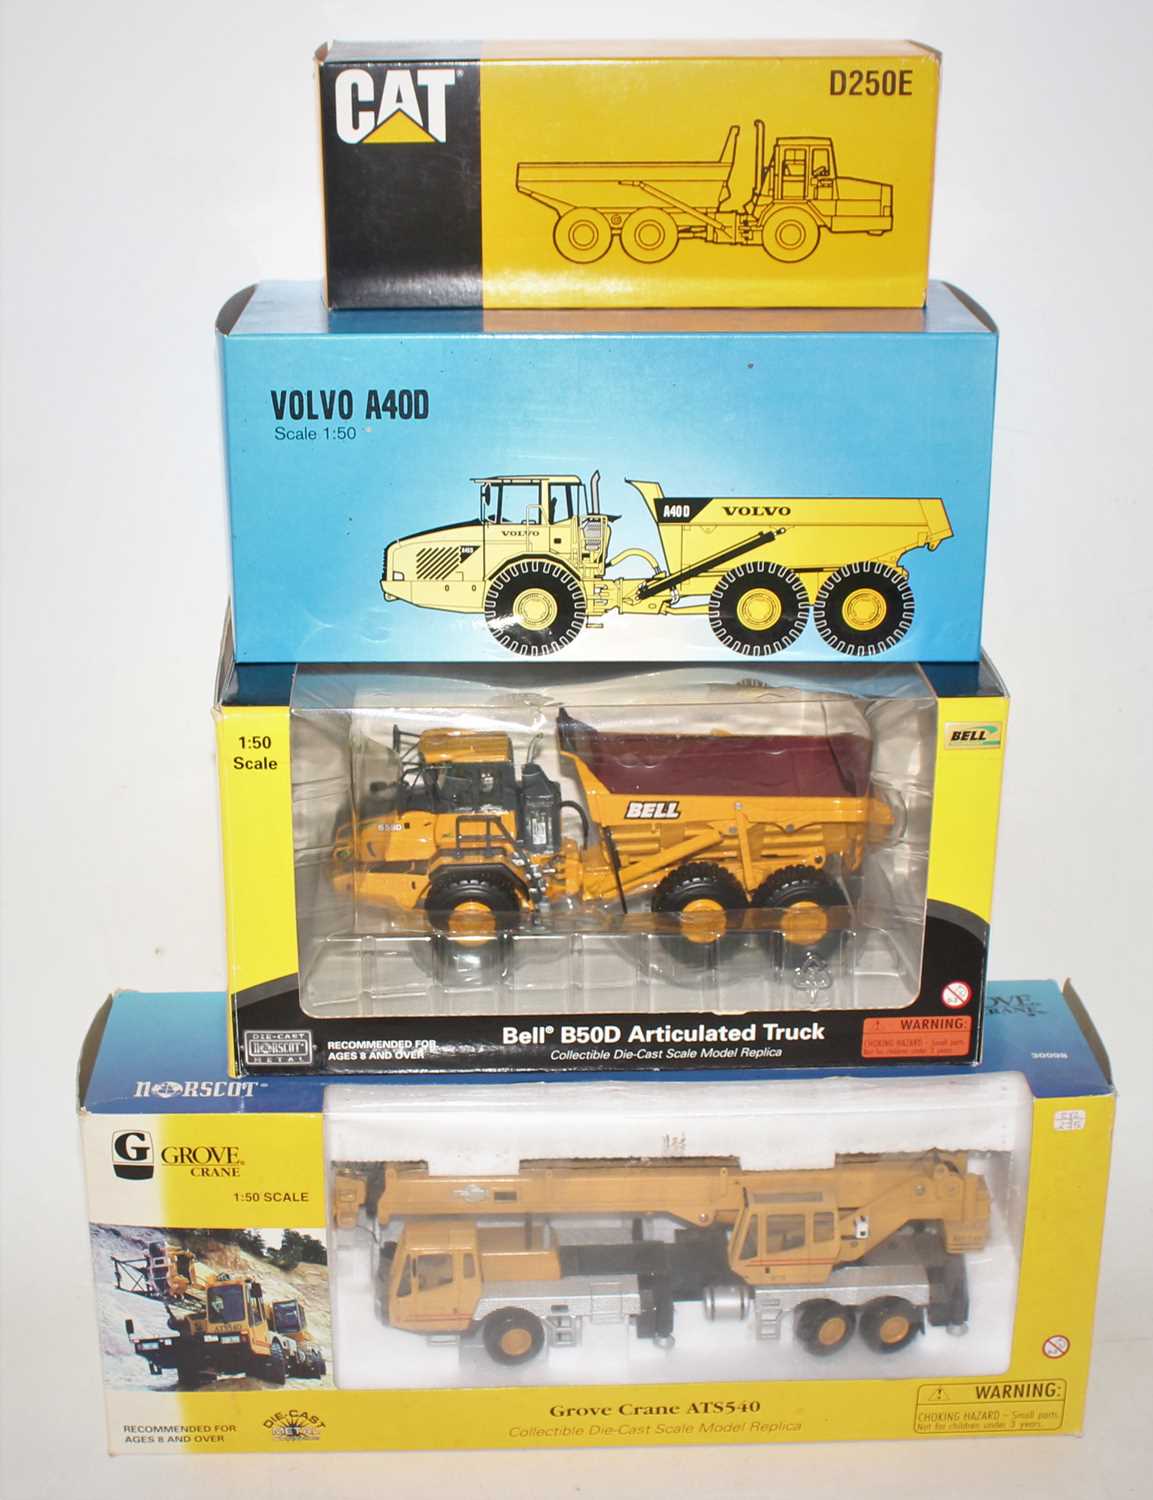 Four various boxed mixed manufacturers 1/50 scale construction vehicles to include a Norscot Grove